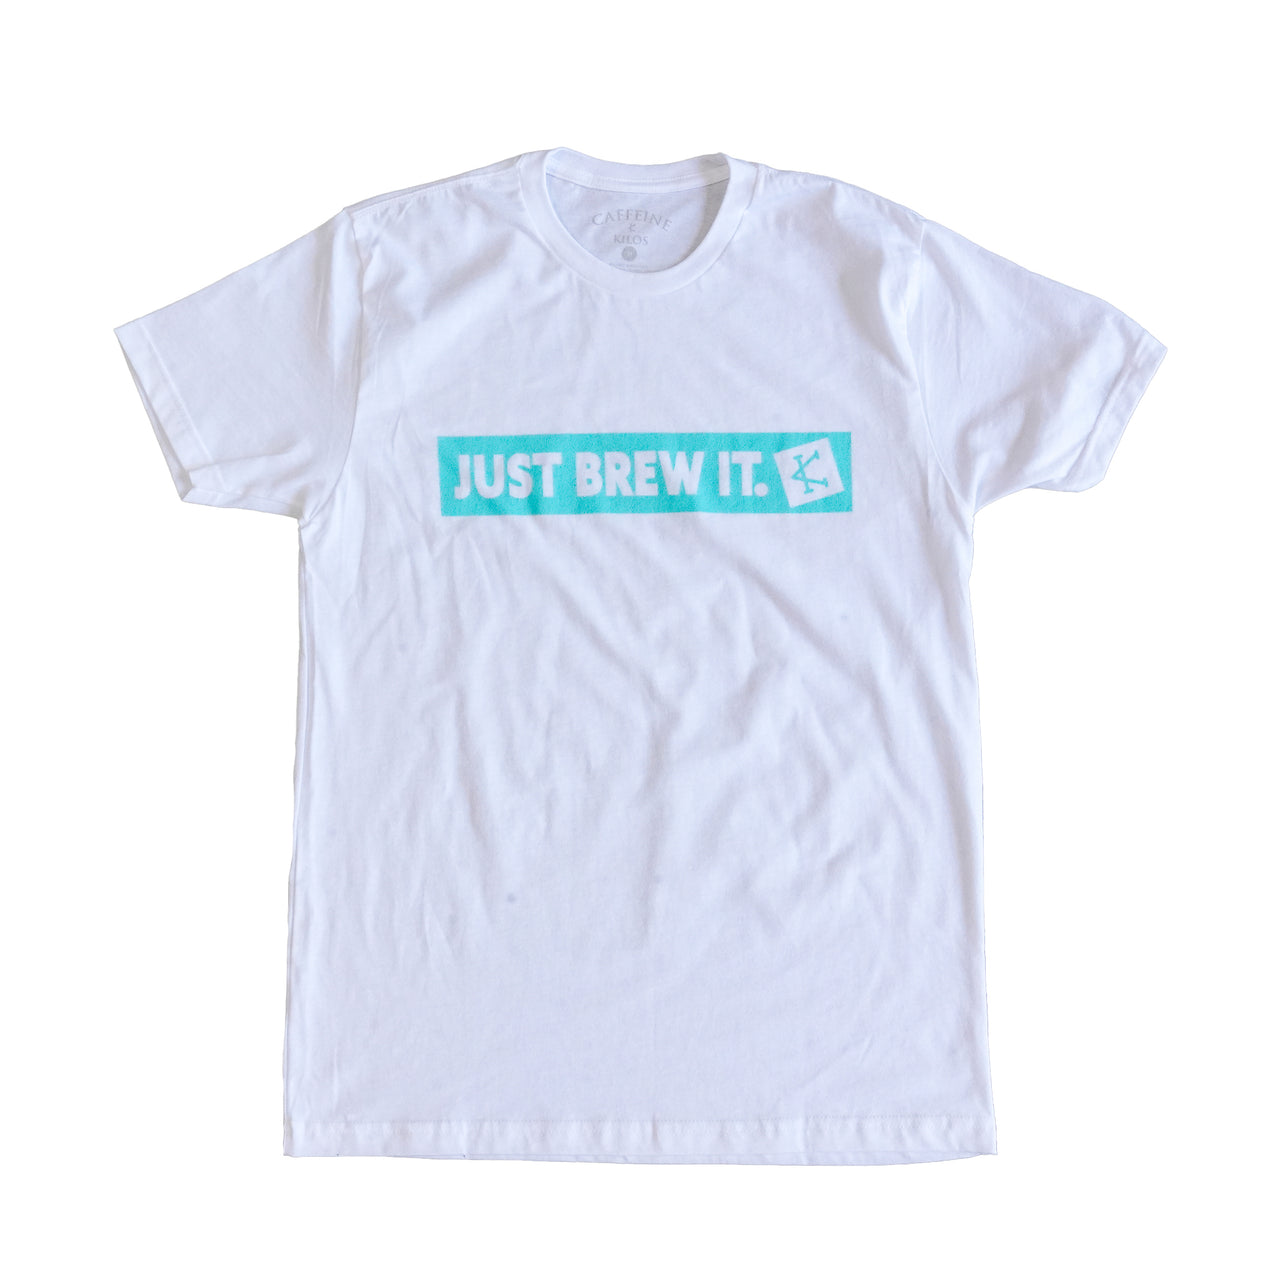 Just Brew It. Tee - Outlet